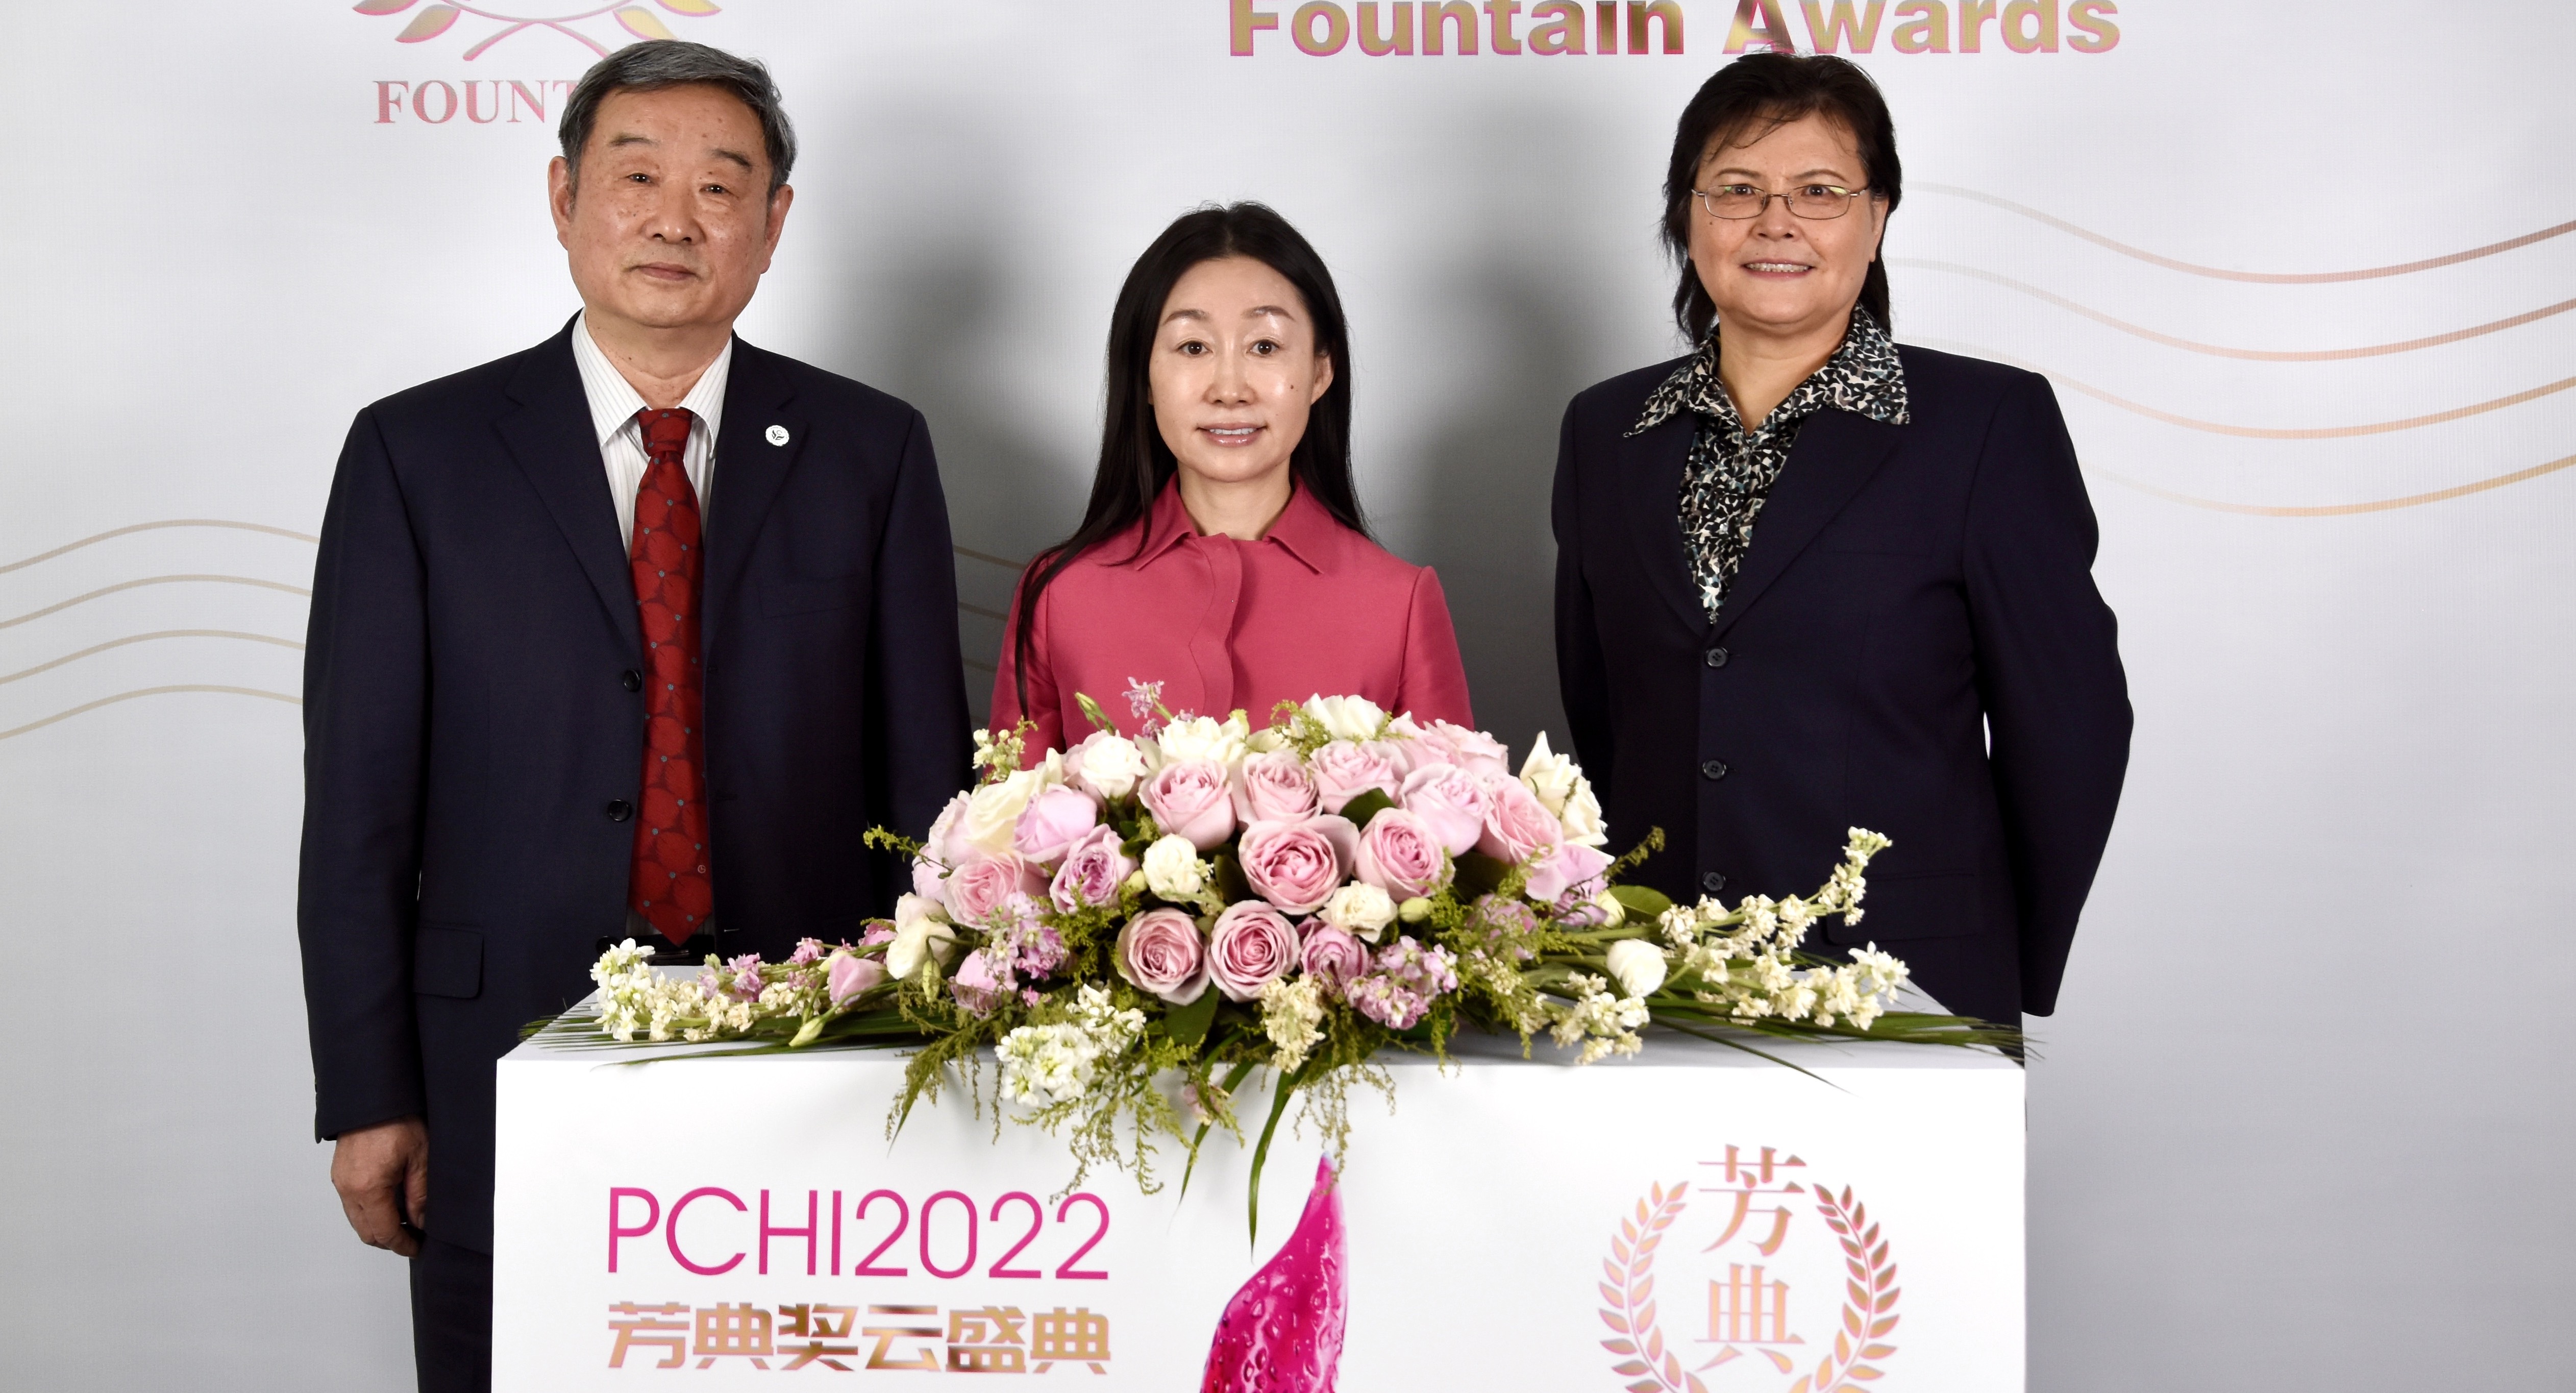 Winners Announced for 2022 PCHi Fountain Awards 